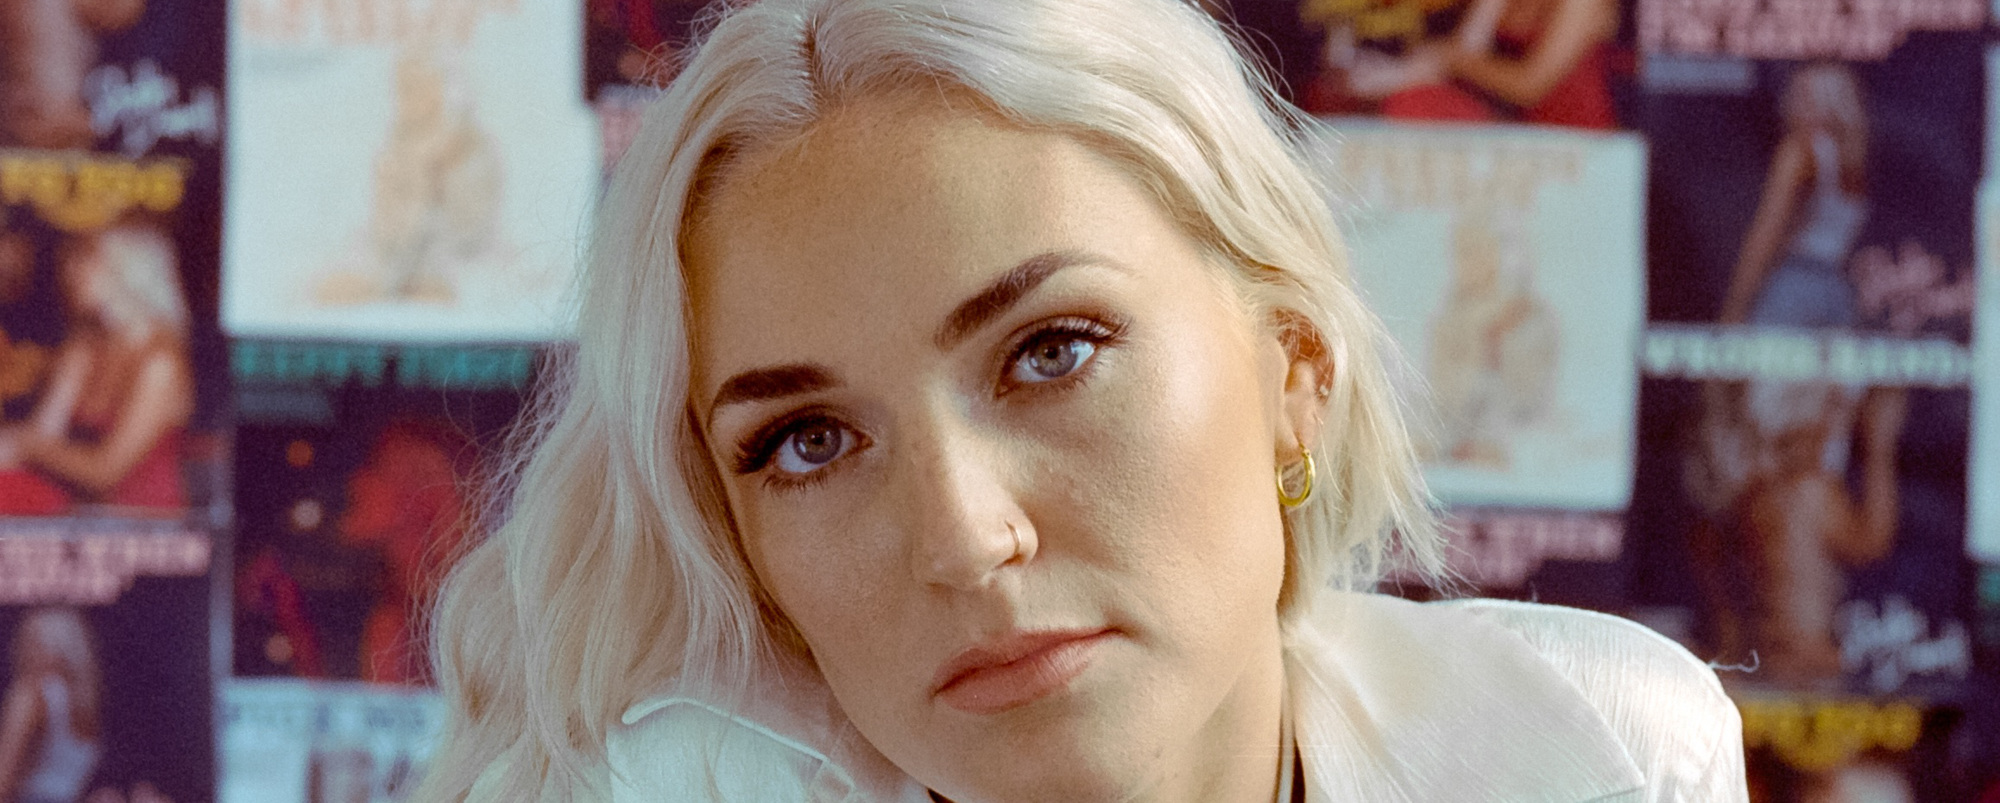 Premiere: Shelby Darrall Shares a Post-Breakup Epiphany in ‘Lied To Too’